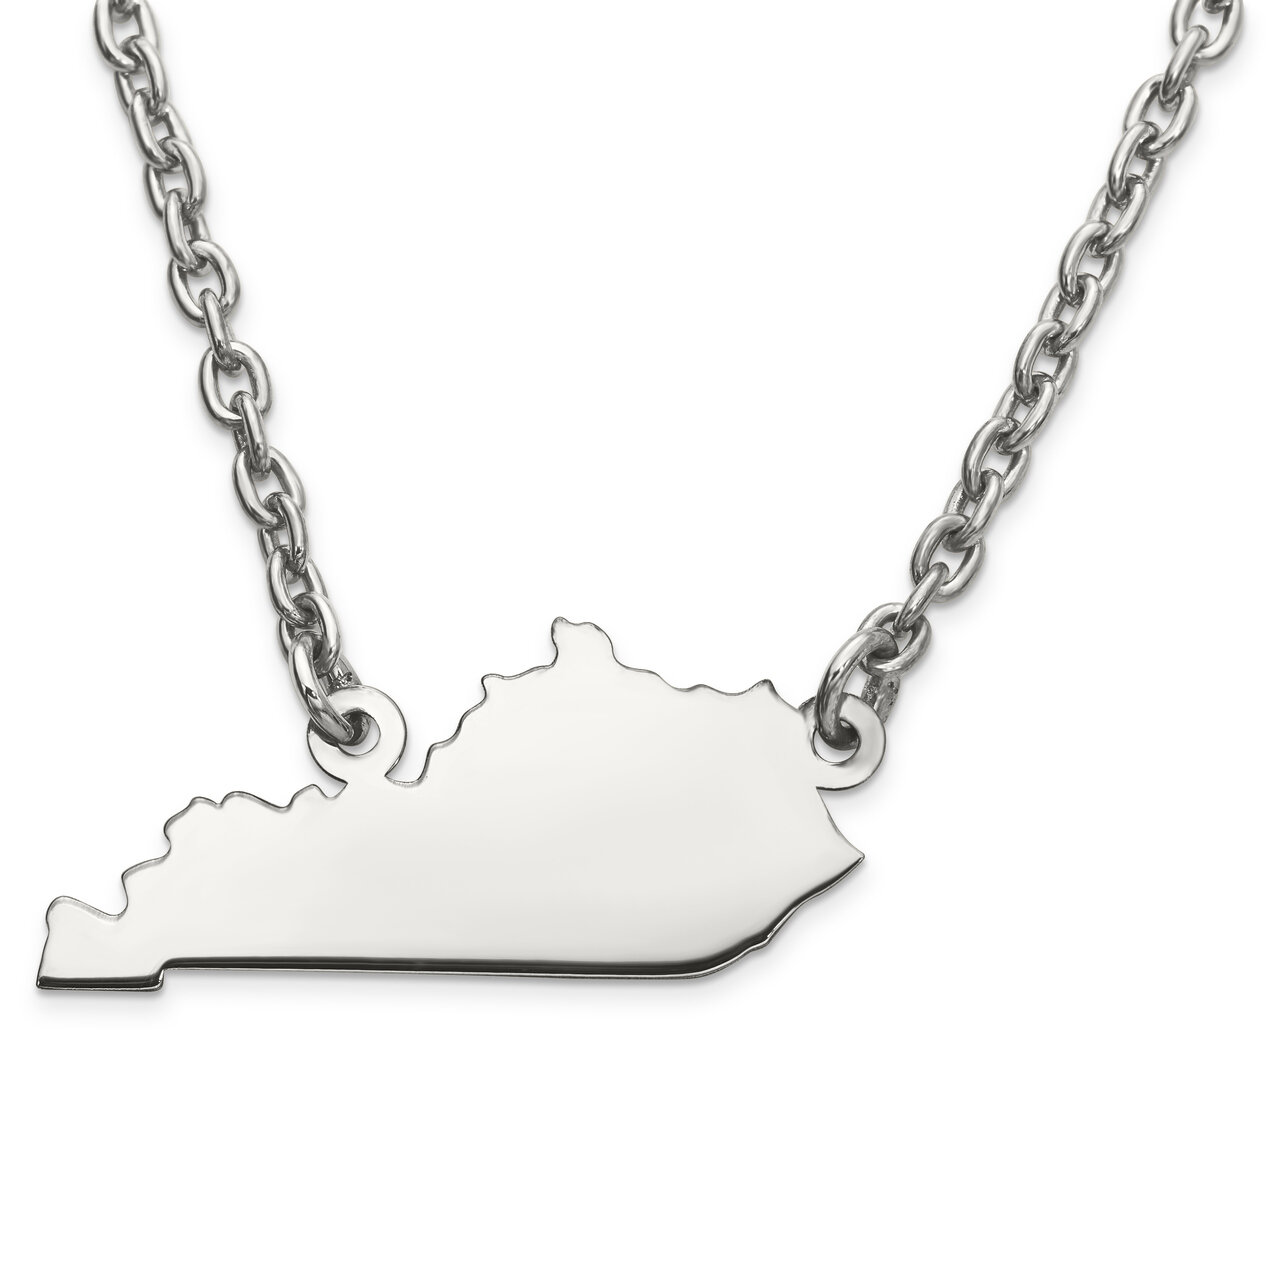 Kentucky State Pendant Necklace with Chain Sterling Silver Engravable XNA706SS-KY